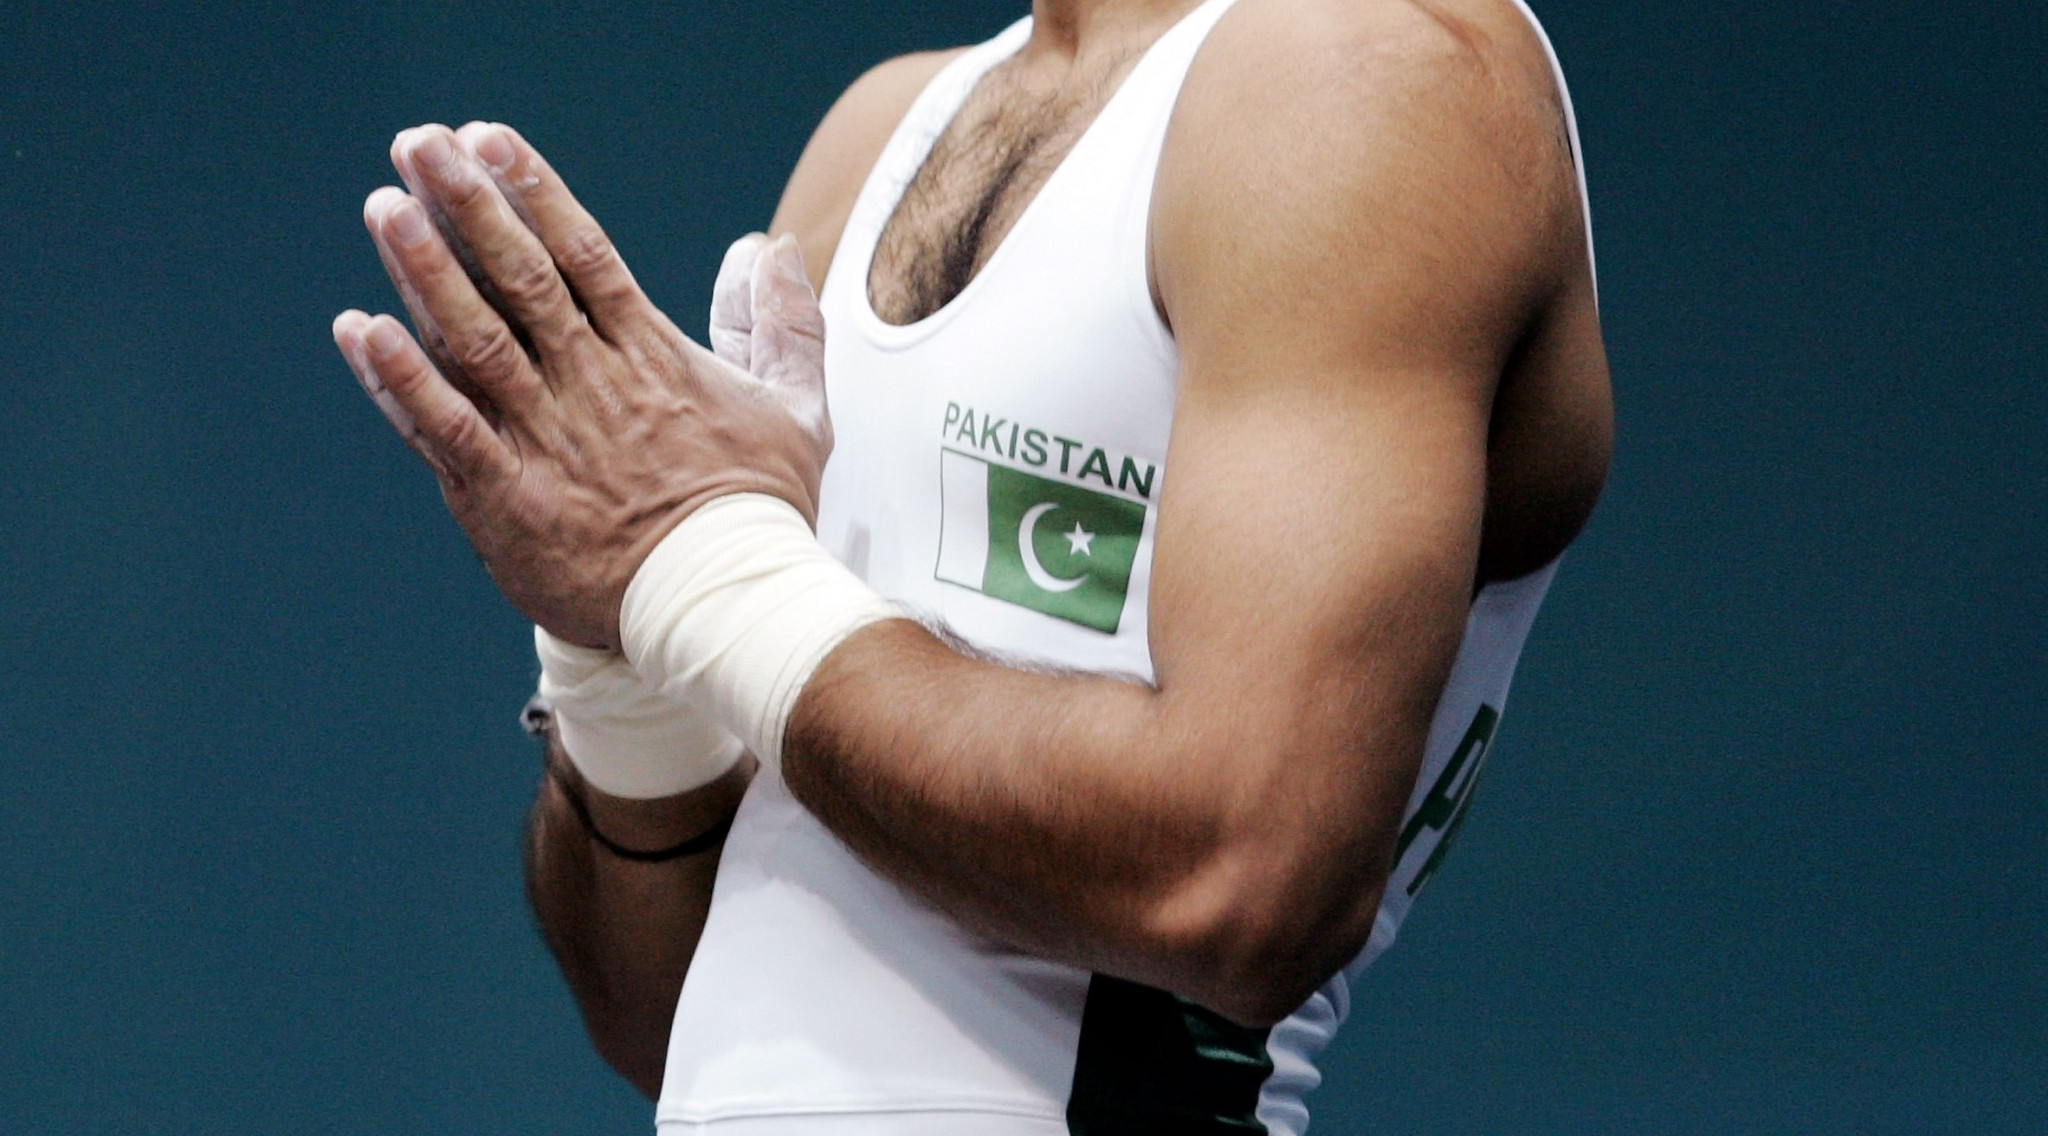 The President of the Pakistan Weightlifting Federation insists four weightlifters charged with refusing to provide samples to anti-doping testers have been wrongly accused ©Getty Images